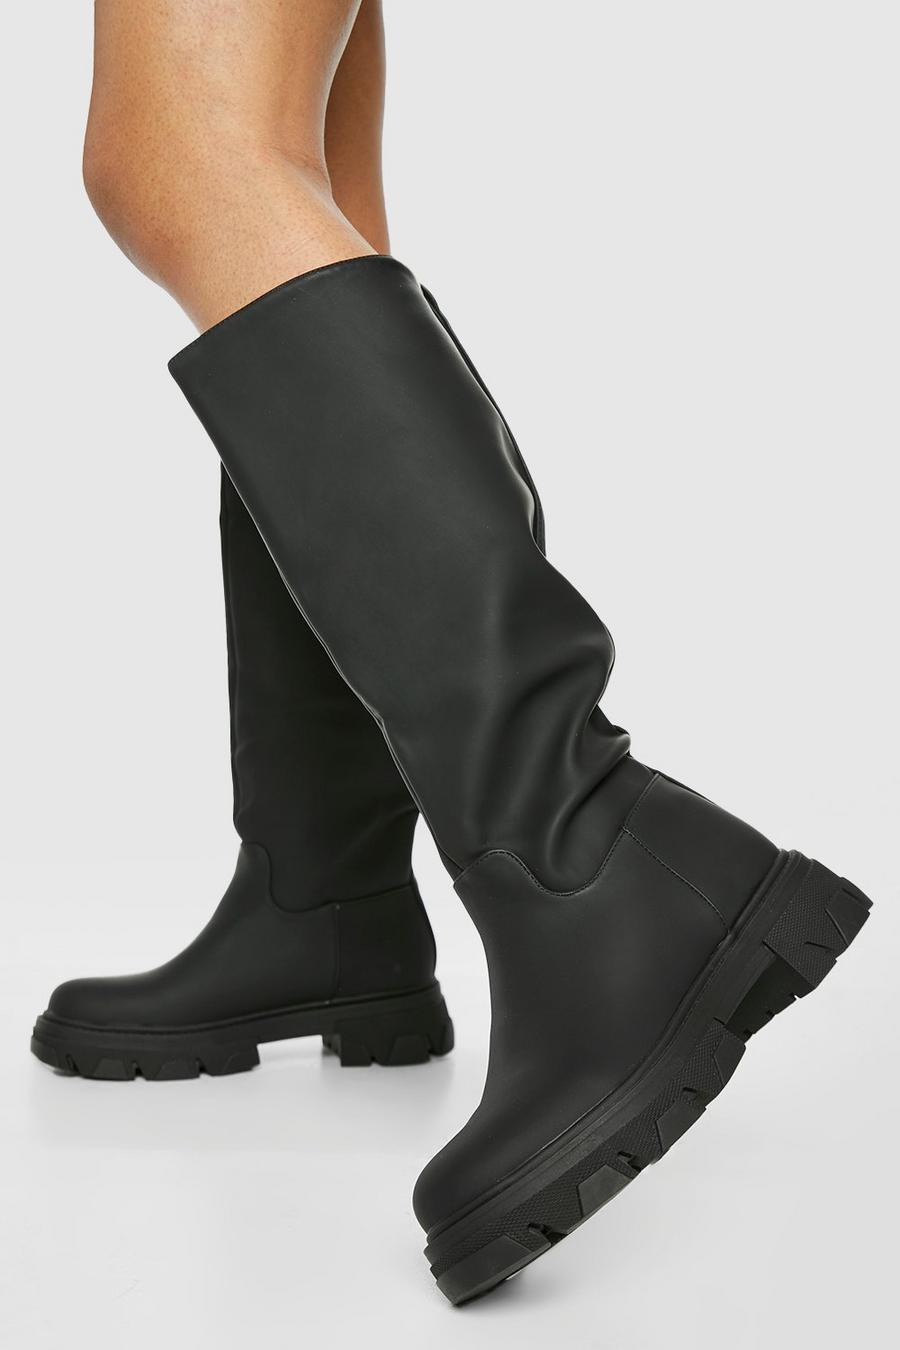 Black Knee High Pull On Rubber Boots